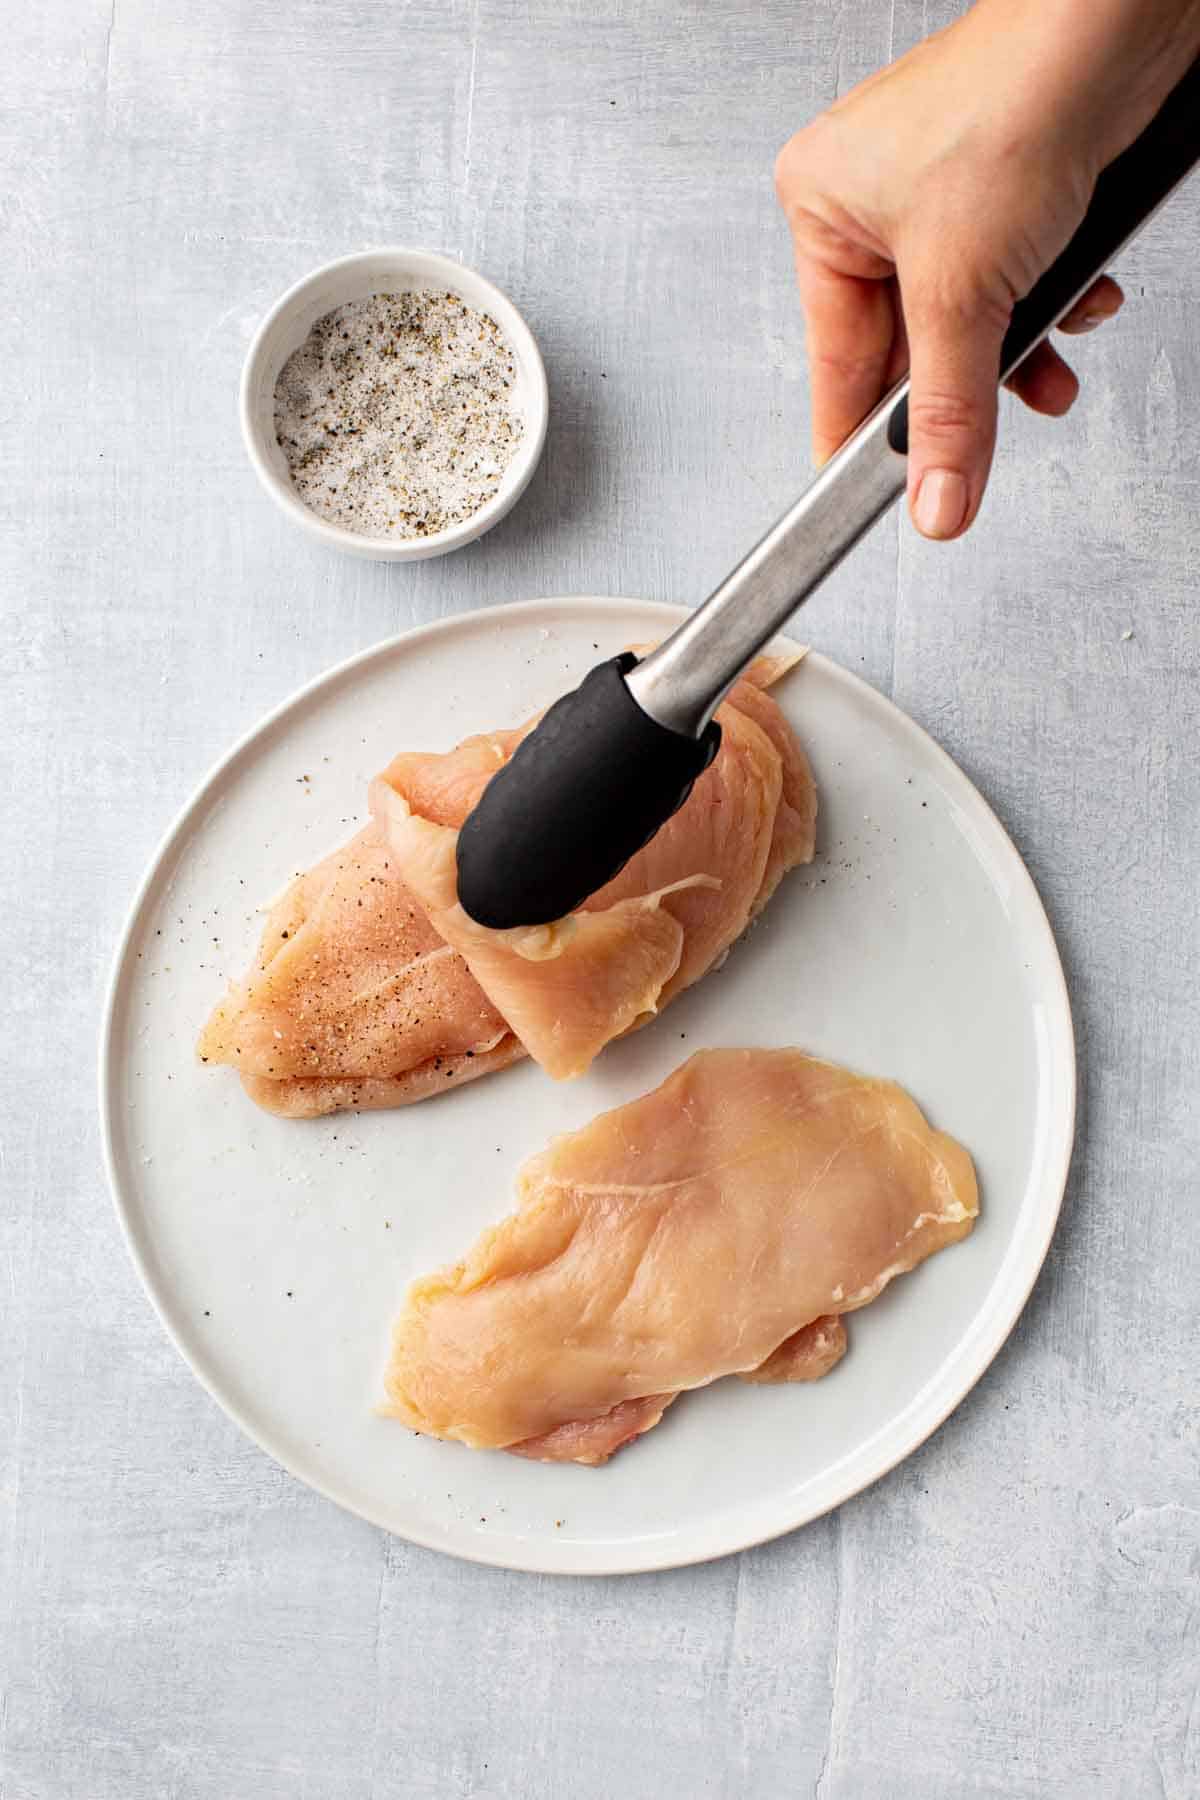 Tongs lifting a chicken breast on a white plate.